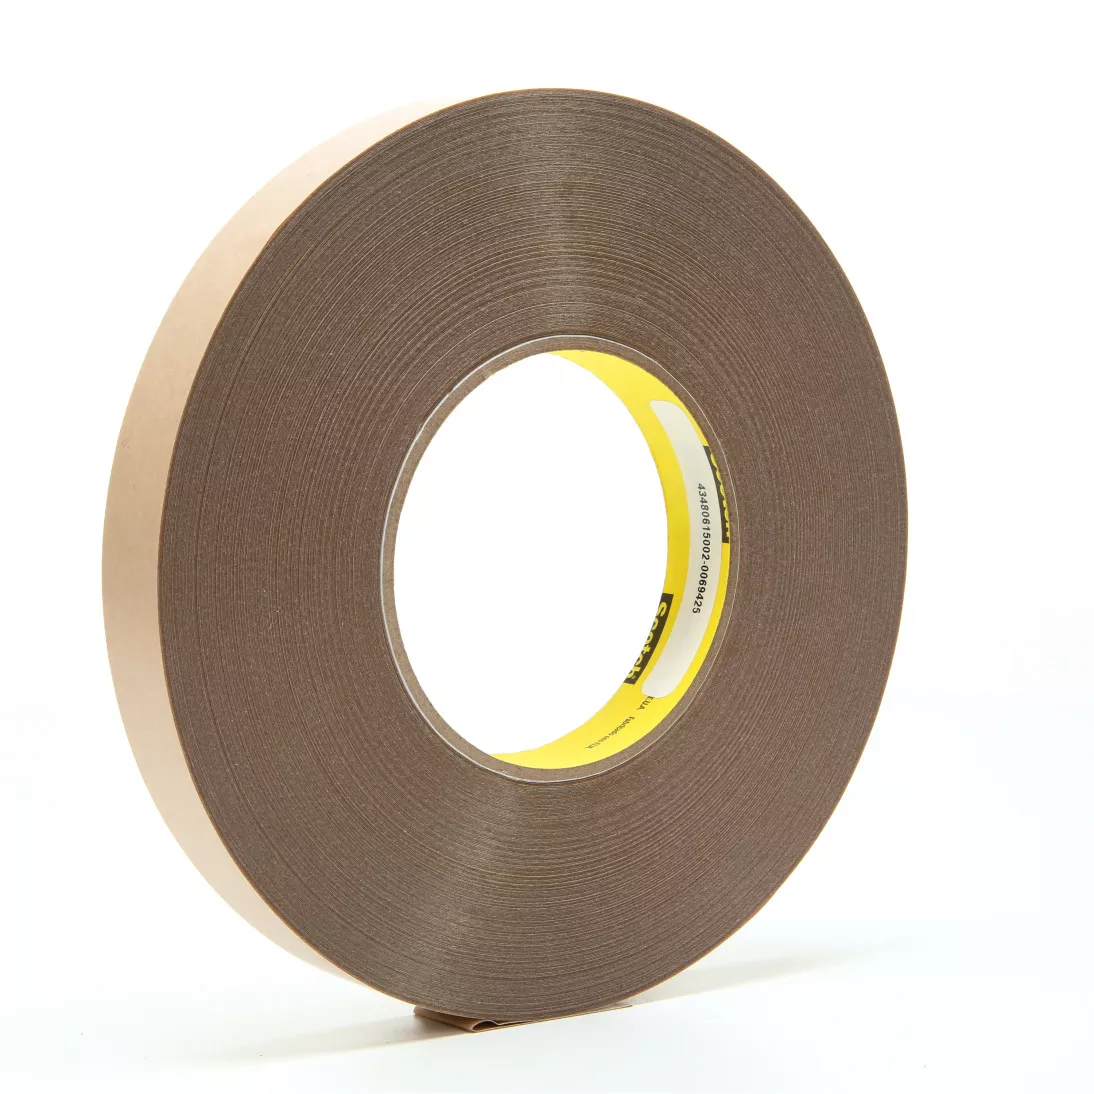 3M™ Removable Repositionable Tape 9425, Clear, 3/4 in x 72 yd, 5.8 mil,
12 rolls per case